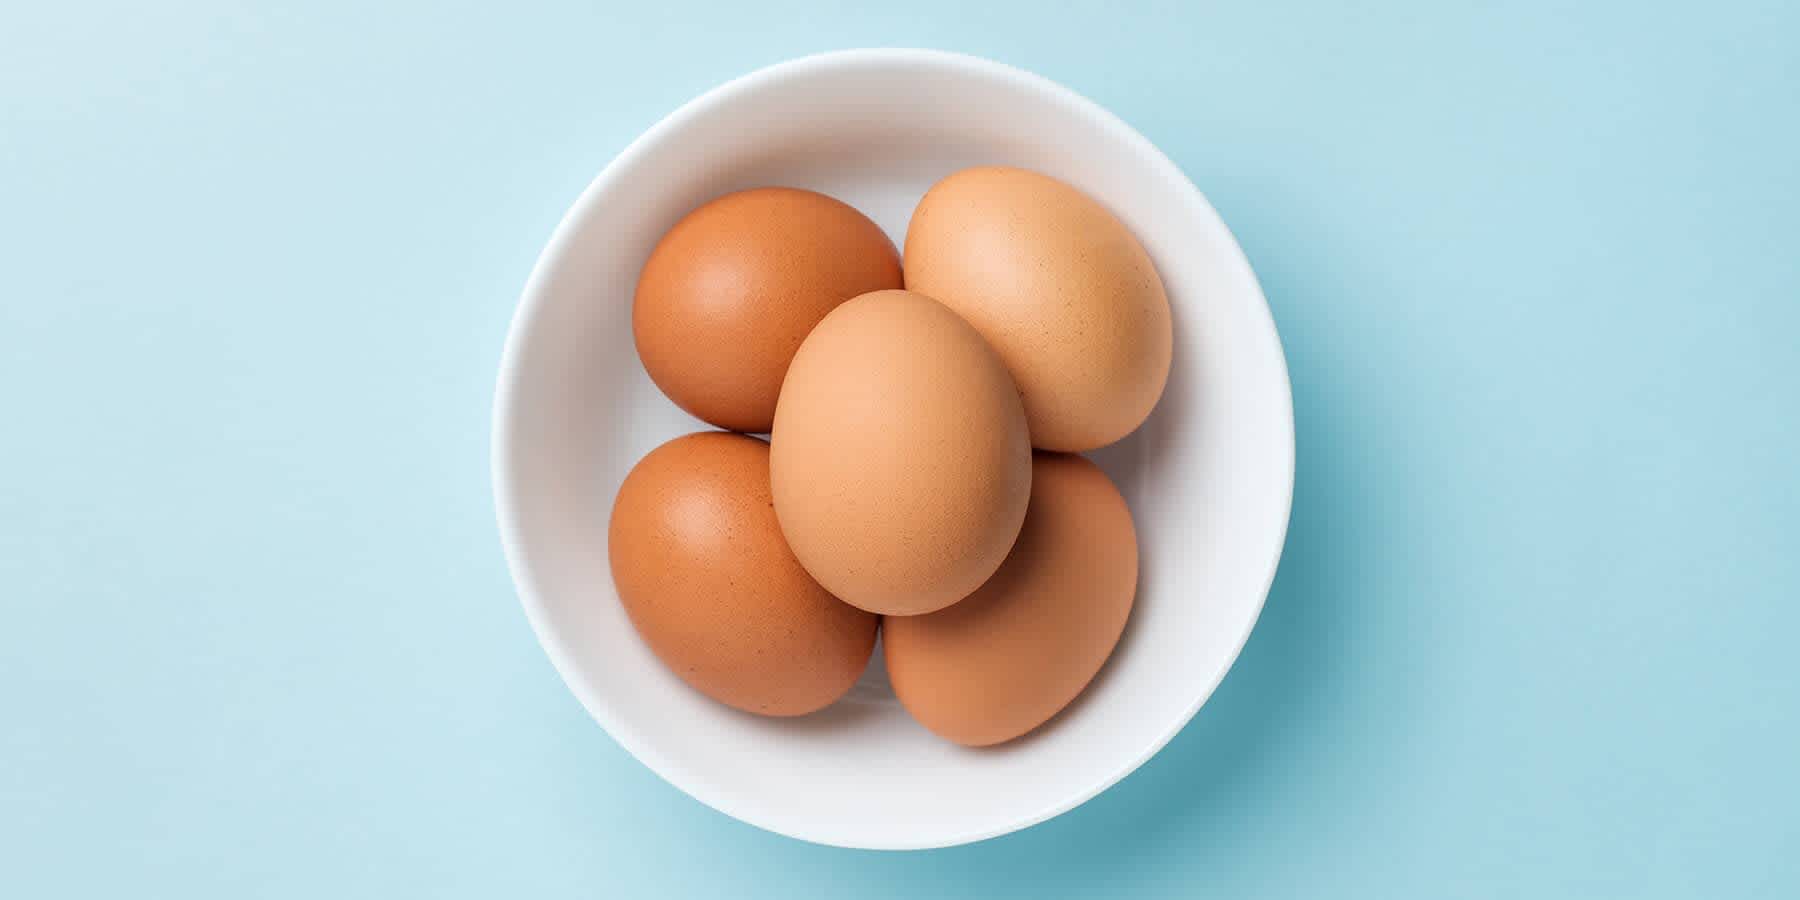 Bowl of hard-boiled eggs that is a good source of protein for energy